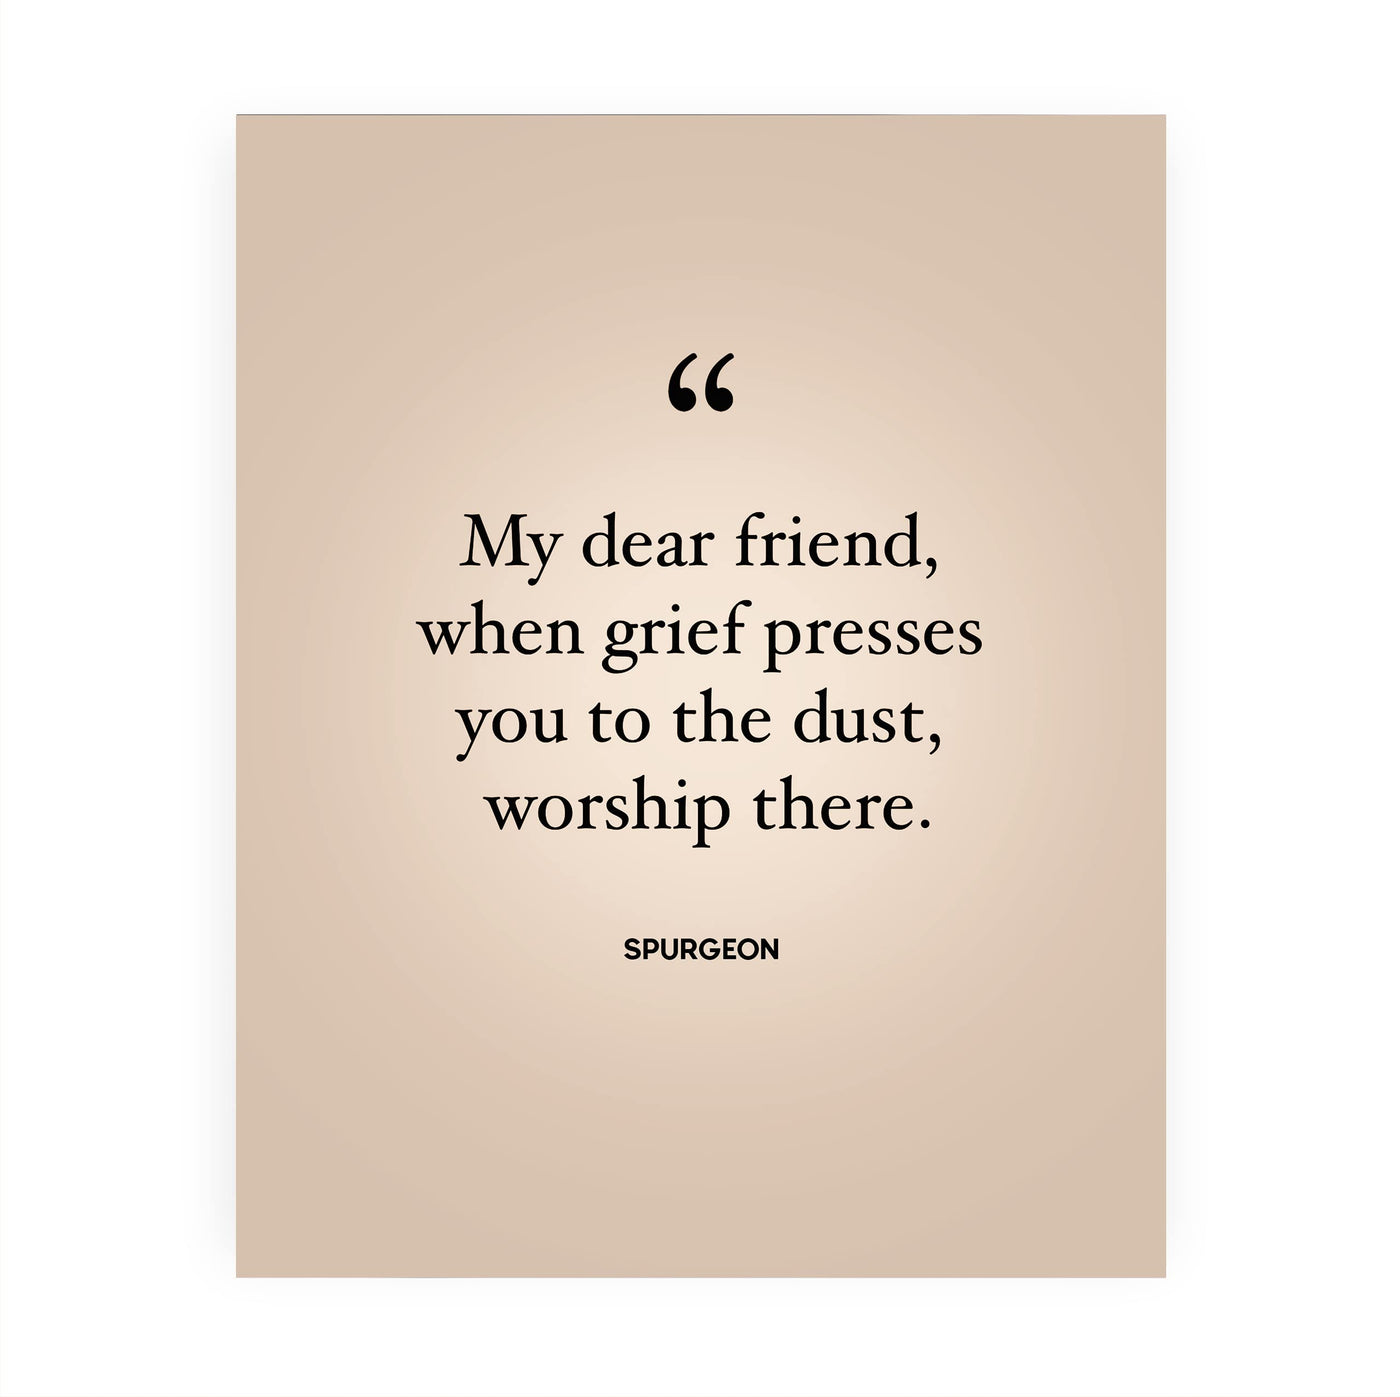 Spurgeon Quotes-"When Grief Presses You to the Dust-Worship There"-Inspirational Christian Decor -8 x 10" Modern Typography Print-Ready to Frame. Religious Home-Office-Church Decor. Encouraging Gift!